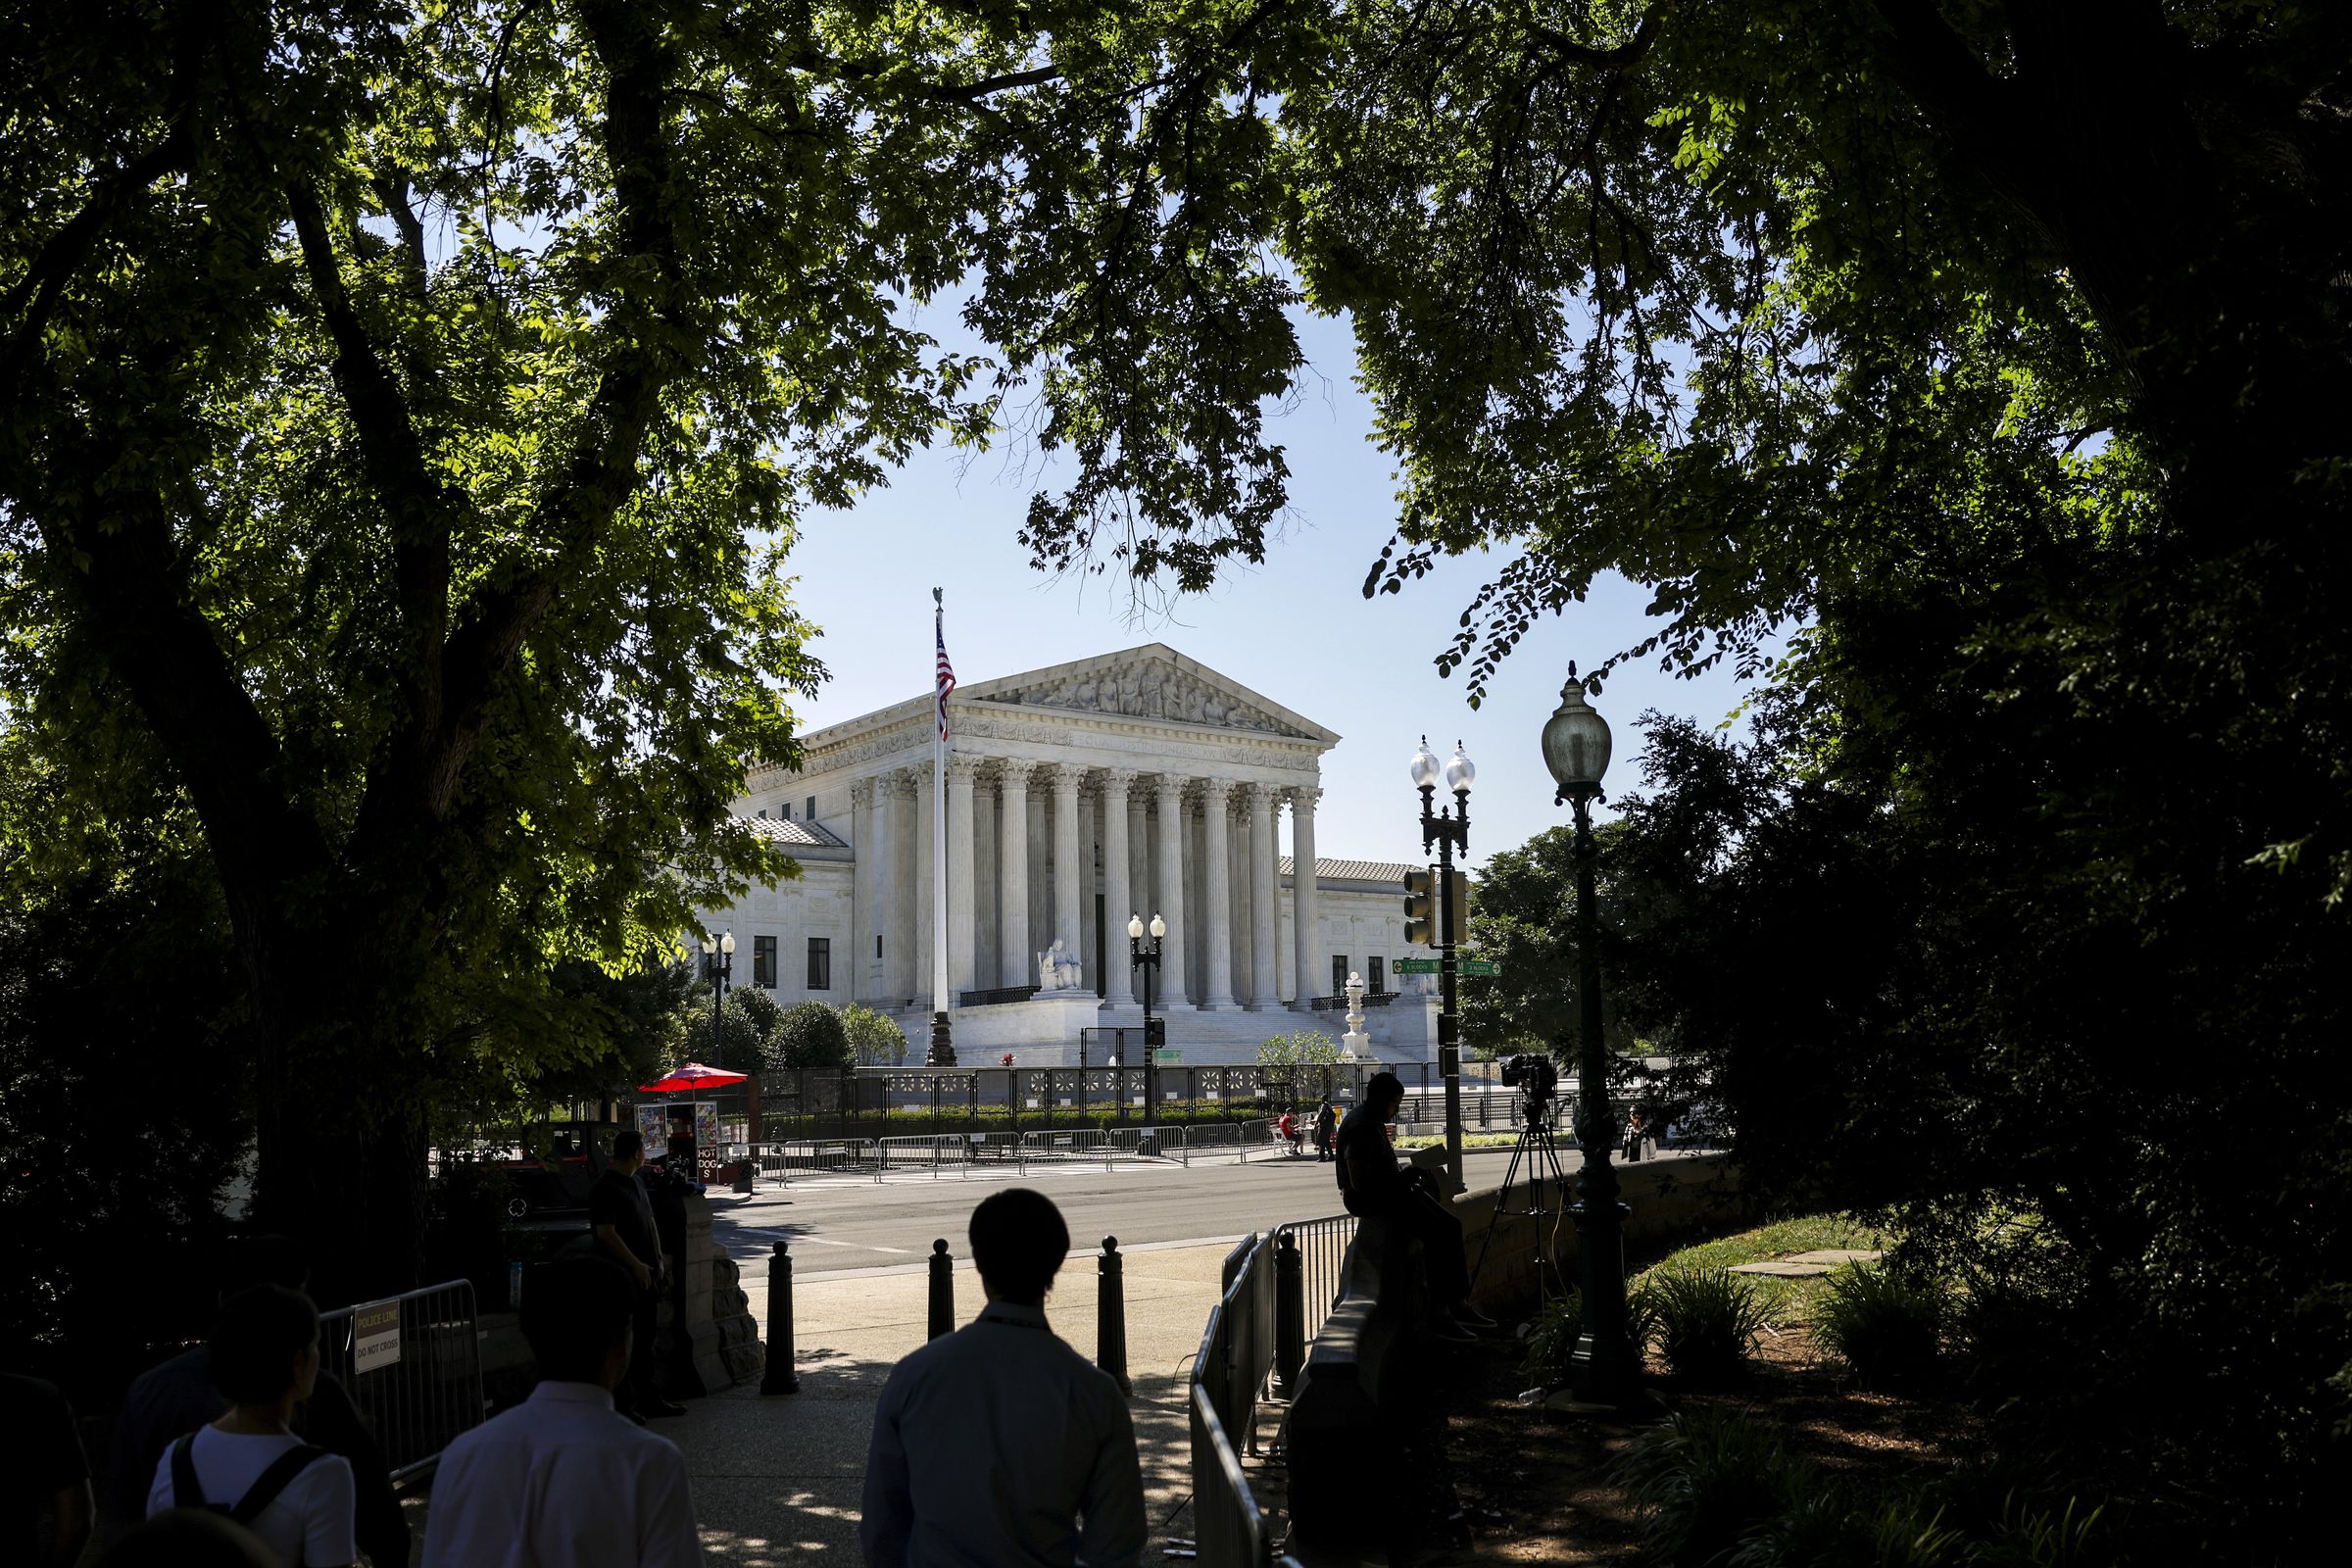 Protests Continue As U.S. Supreme Court Issues Final Opinions For The Term